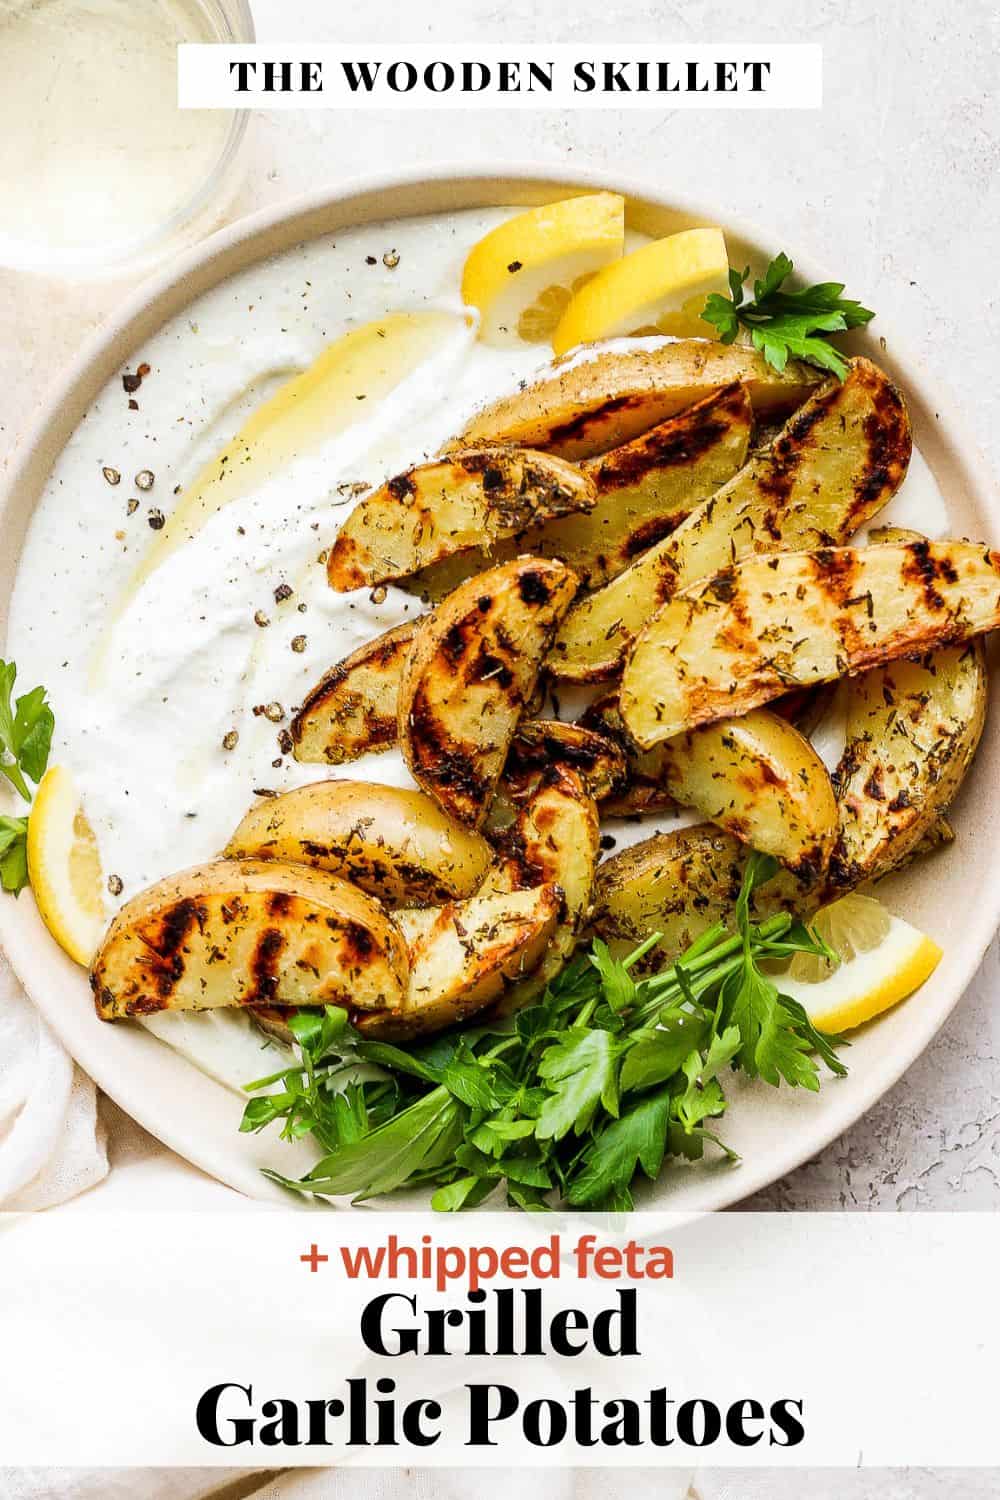 Pinterest image showing a bowl of whipped feta topped with garlic potatoes, lemon wedges, and fresh parsley.